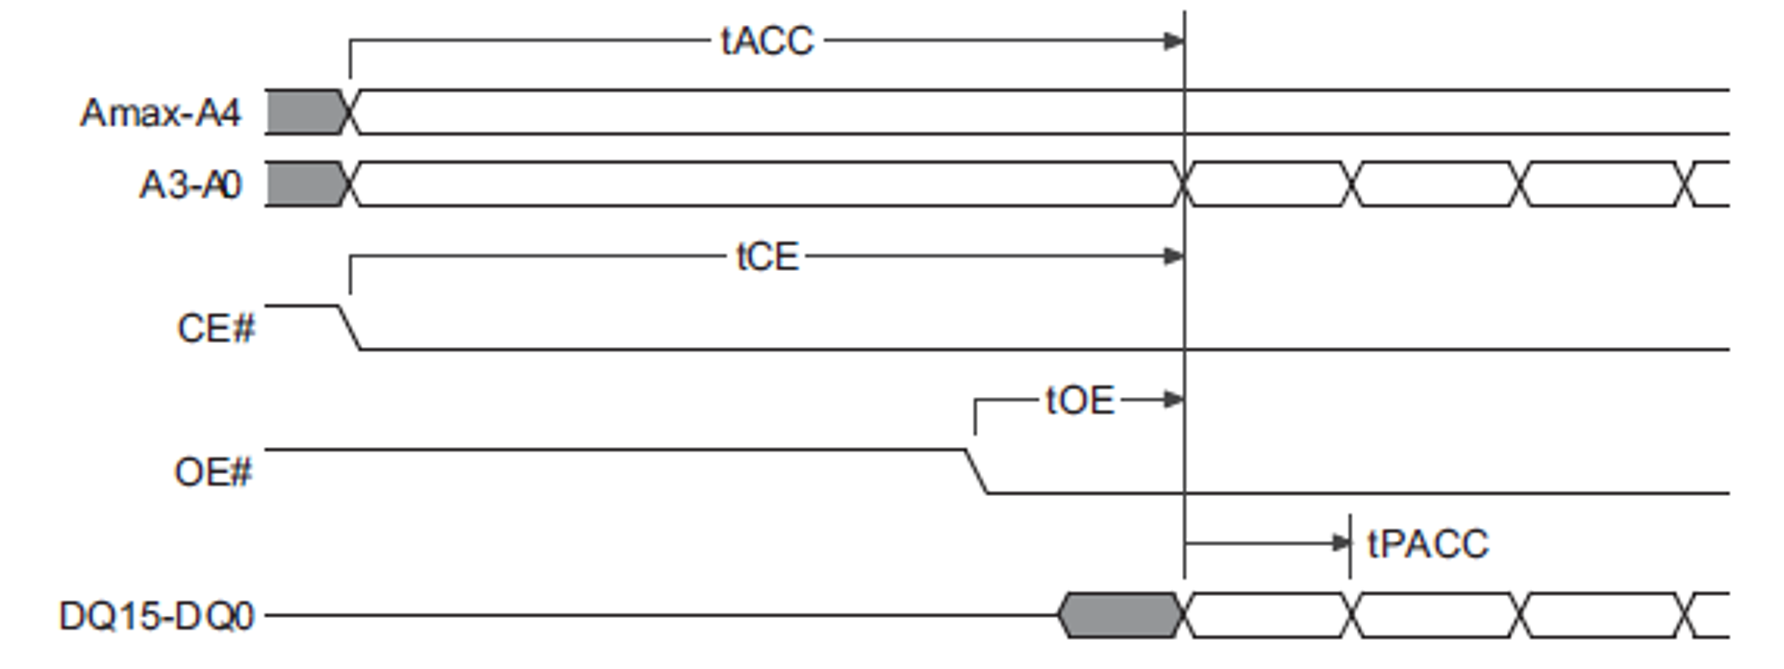 nor_flash_page_read_timing_diagram_sprac21.png